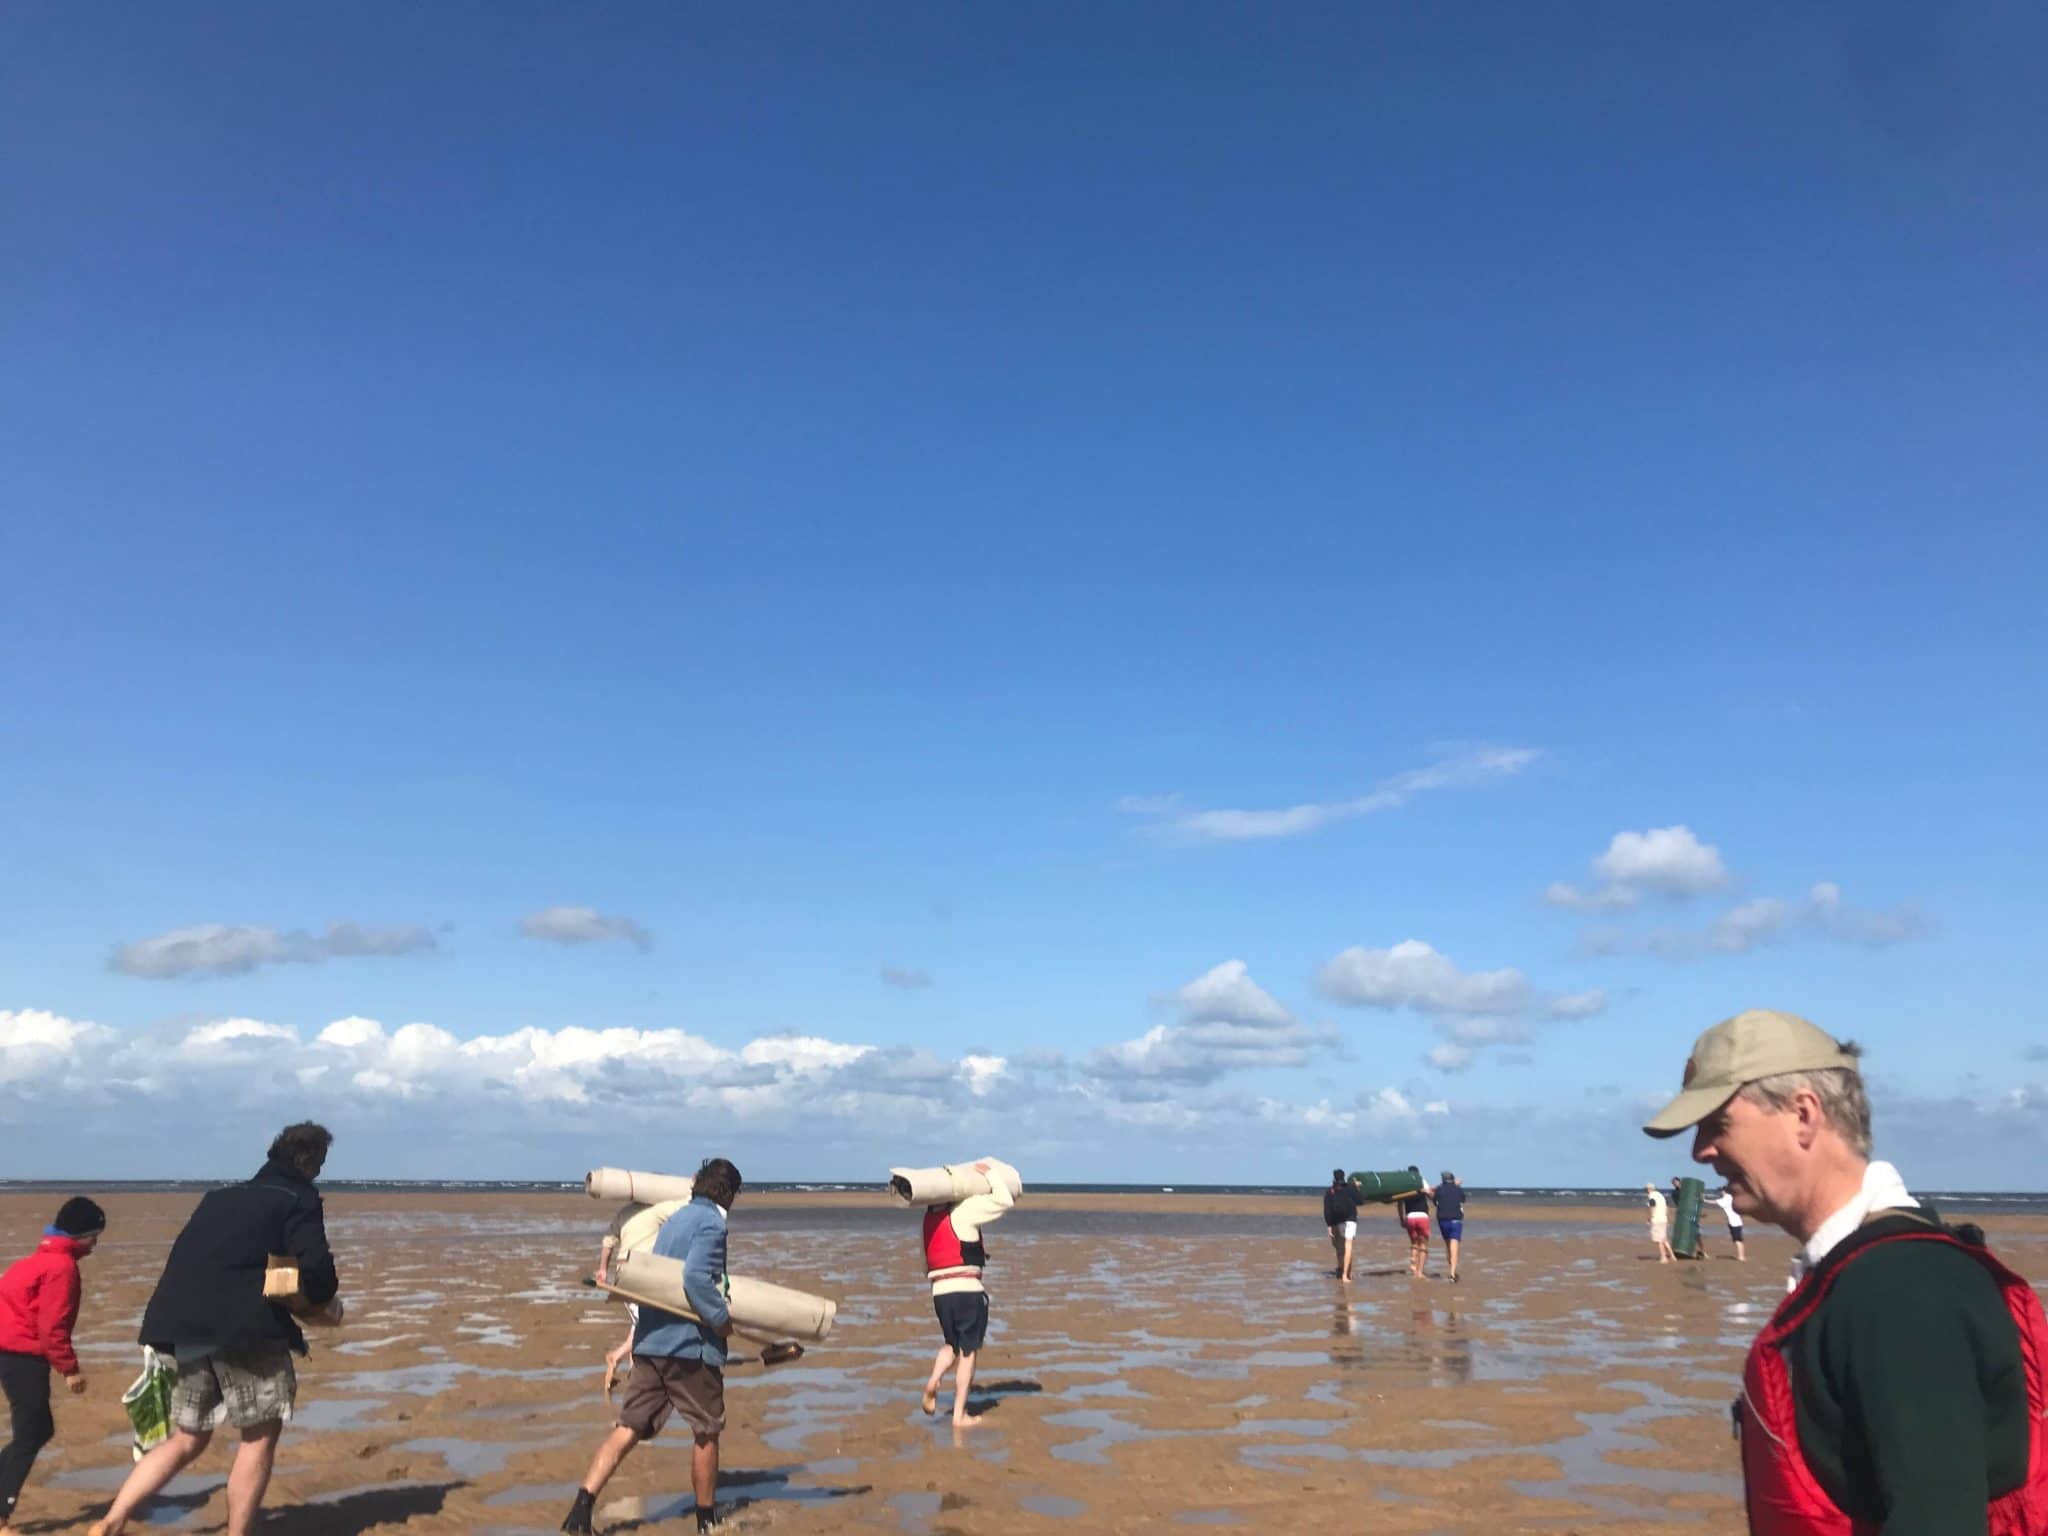 Spoonbill Trophy 2019 | On the venture out to Blakeney Bar